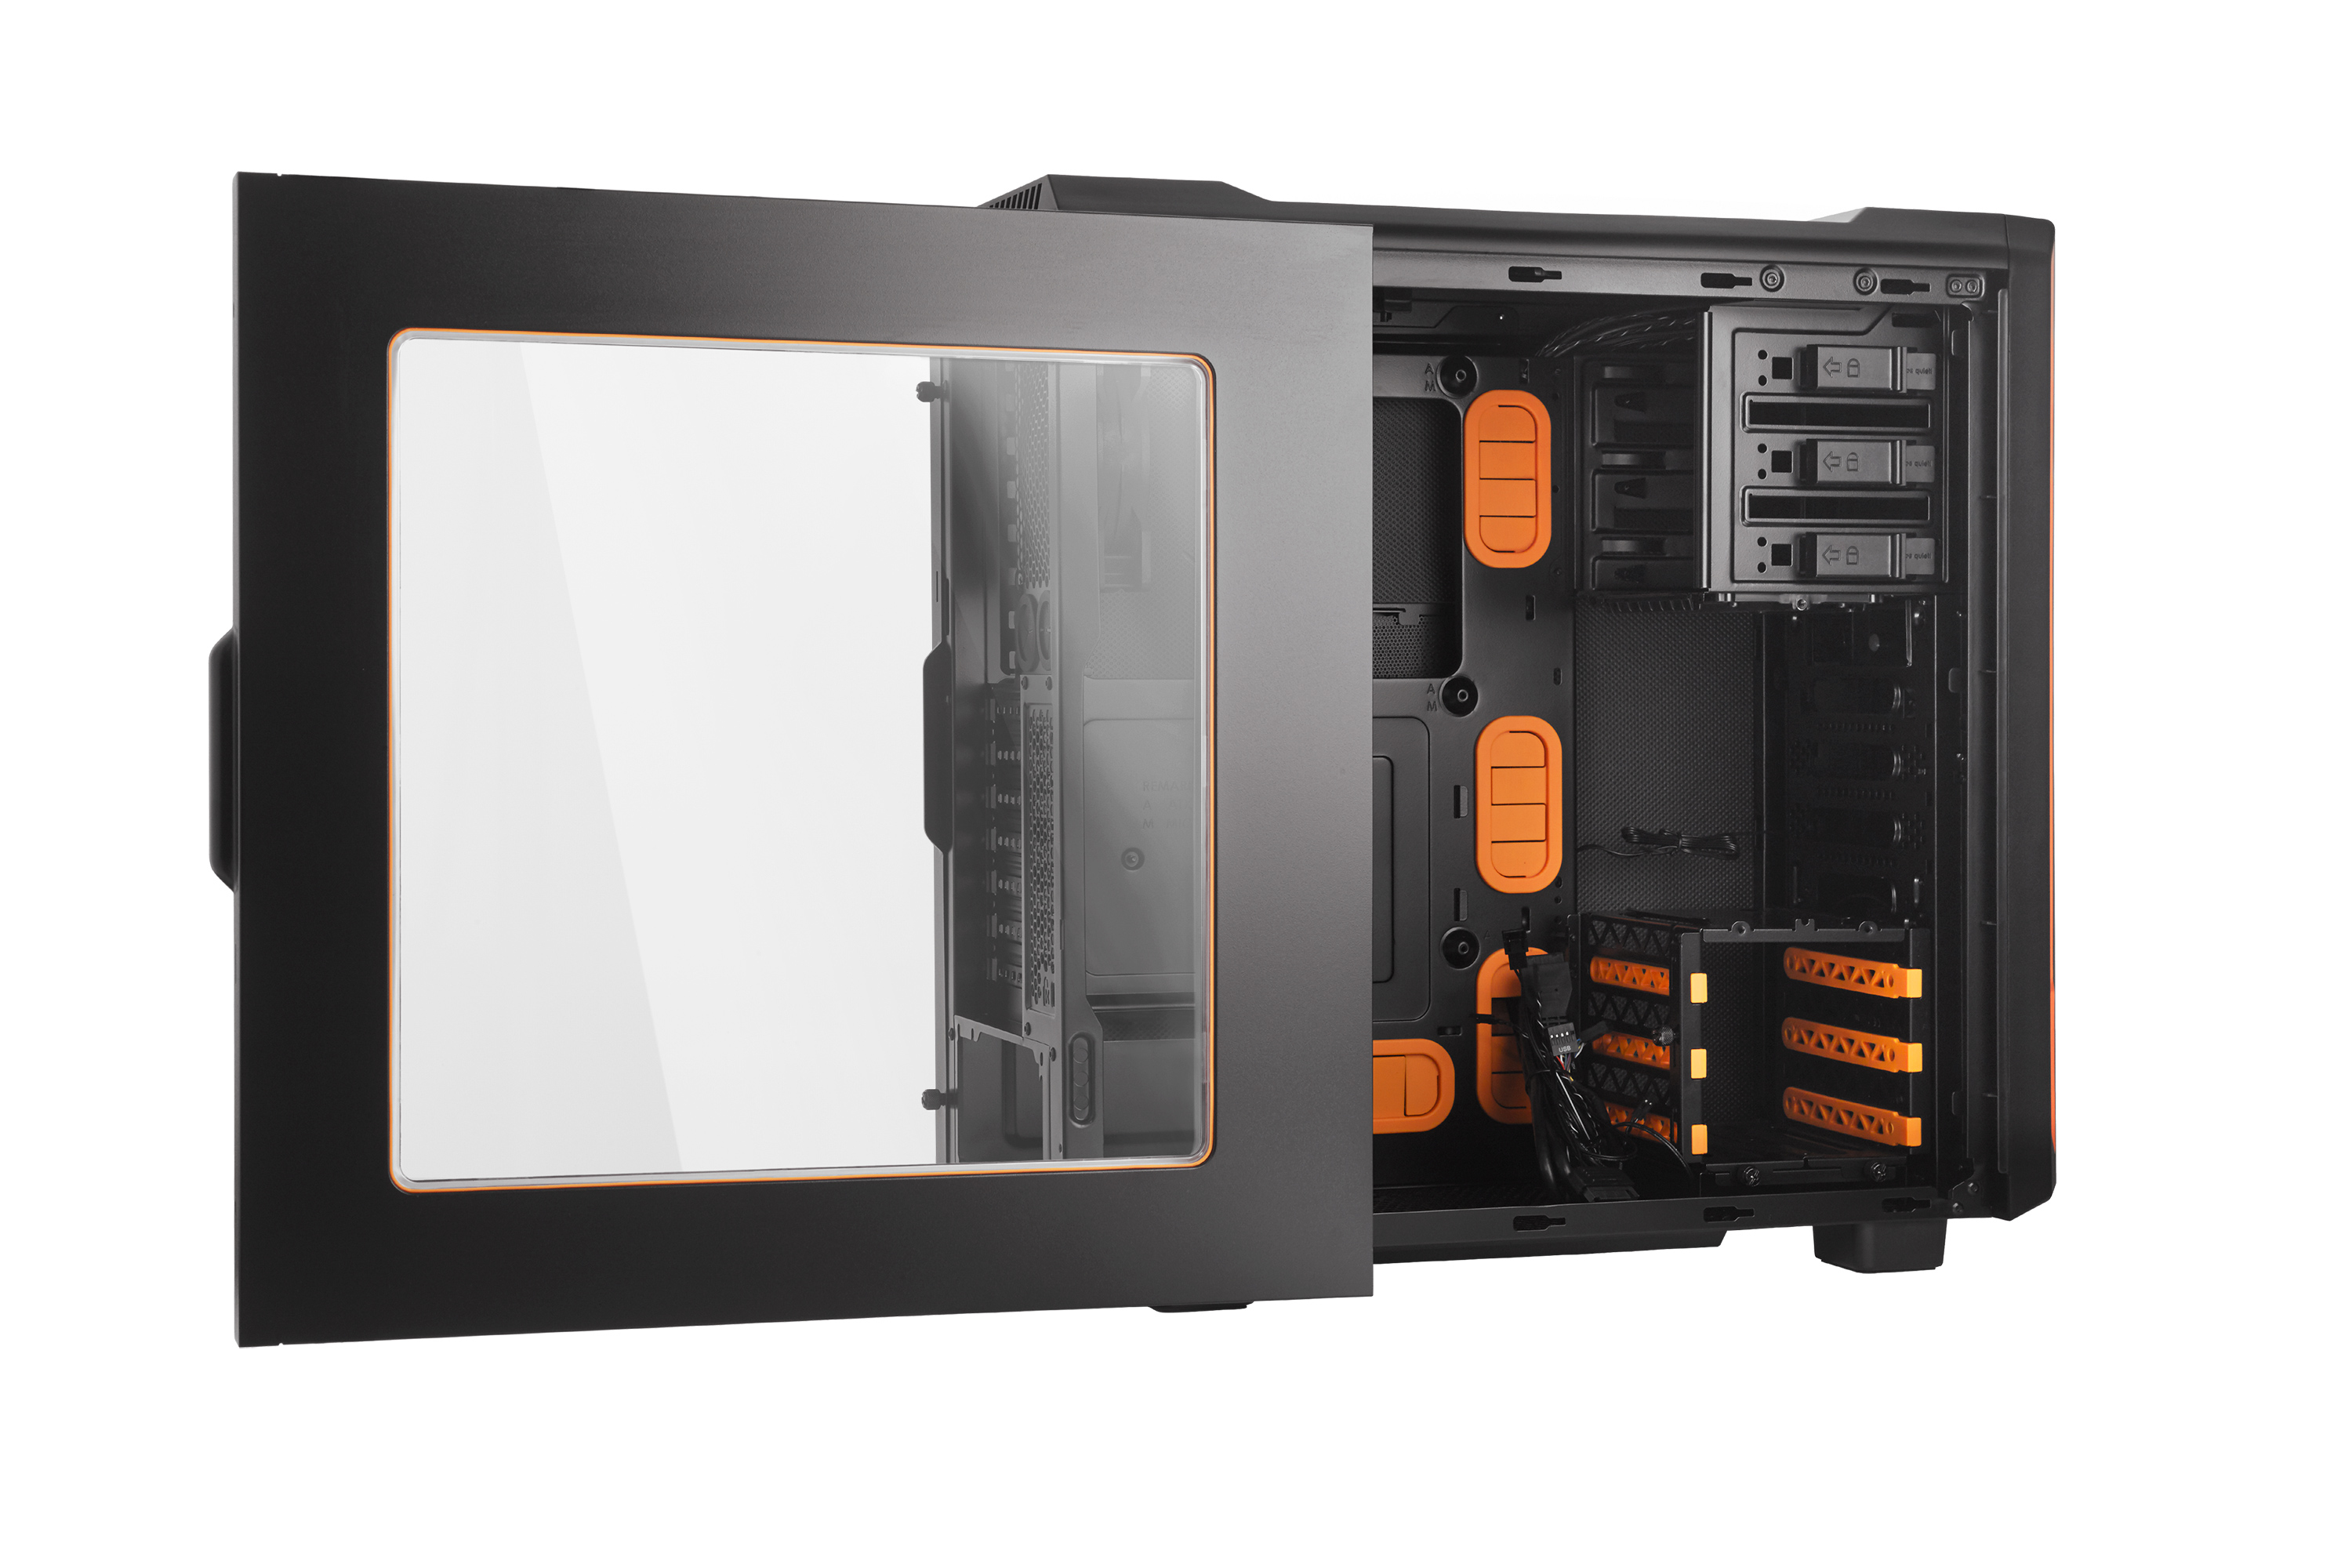 be quiet! Silent Base 600 Window Orange, 495 x 230 x 493, IO-panel 2x USB 3.0, 2x USB 2.0, HD Audio, 3x 5,25, 3x 3,5, 3x 2,5, inc 1x 140 mm en 1x 120 mm fan, dual air channel cooling